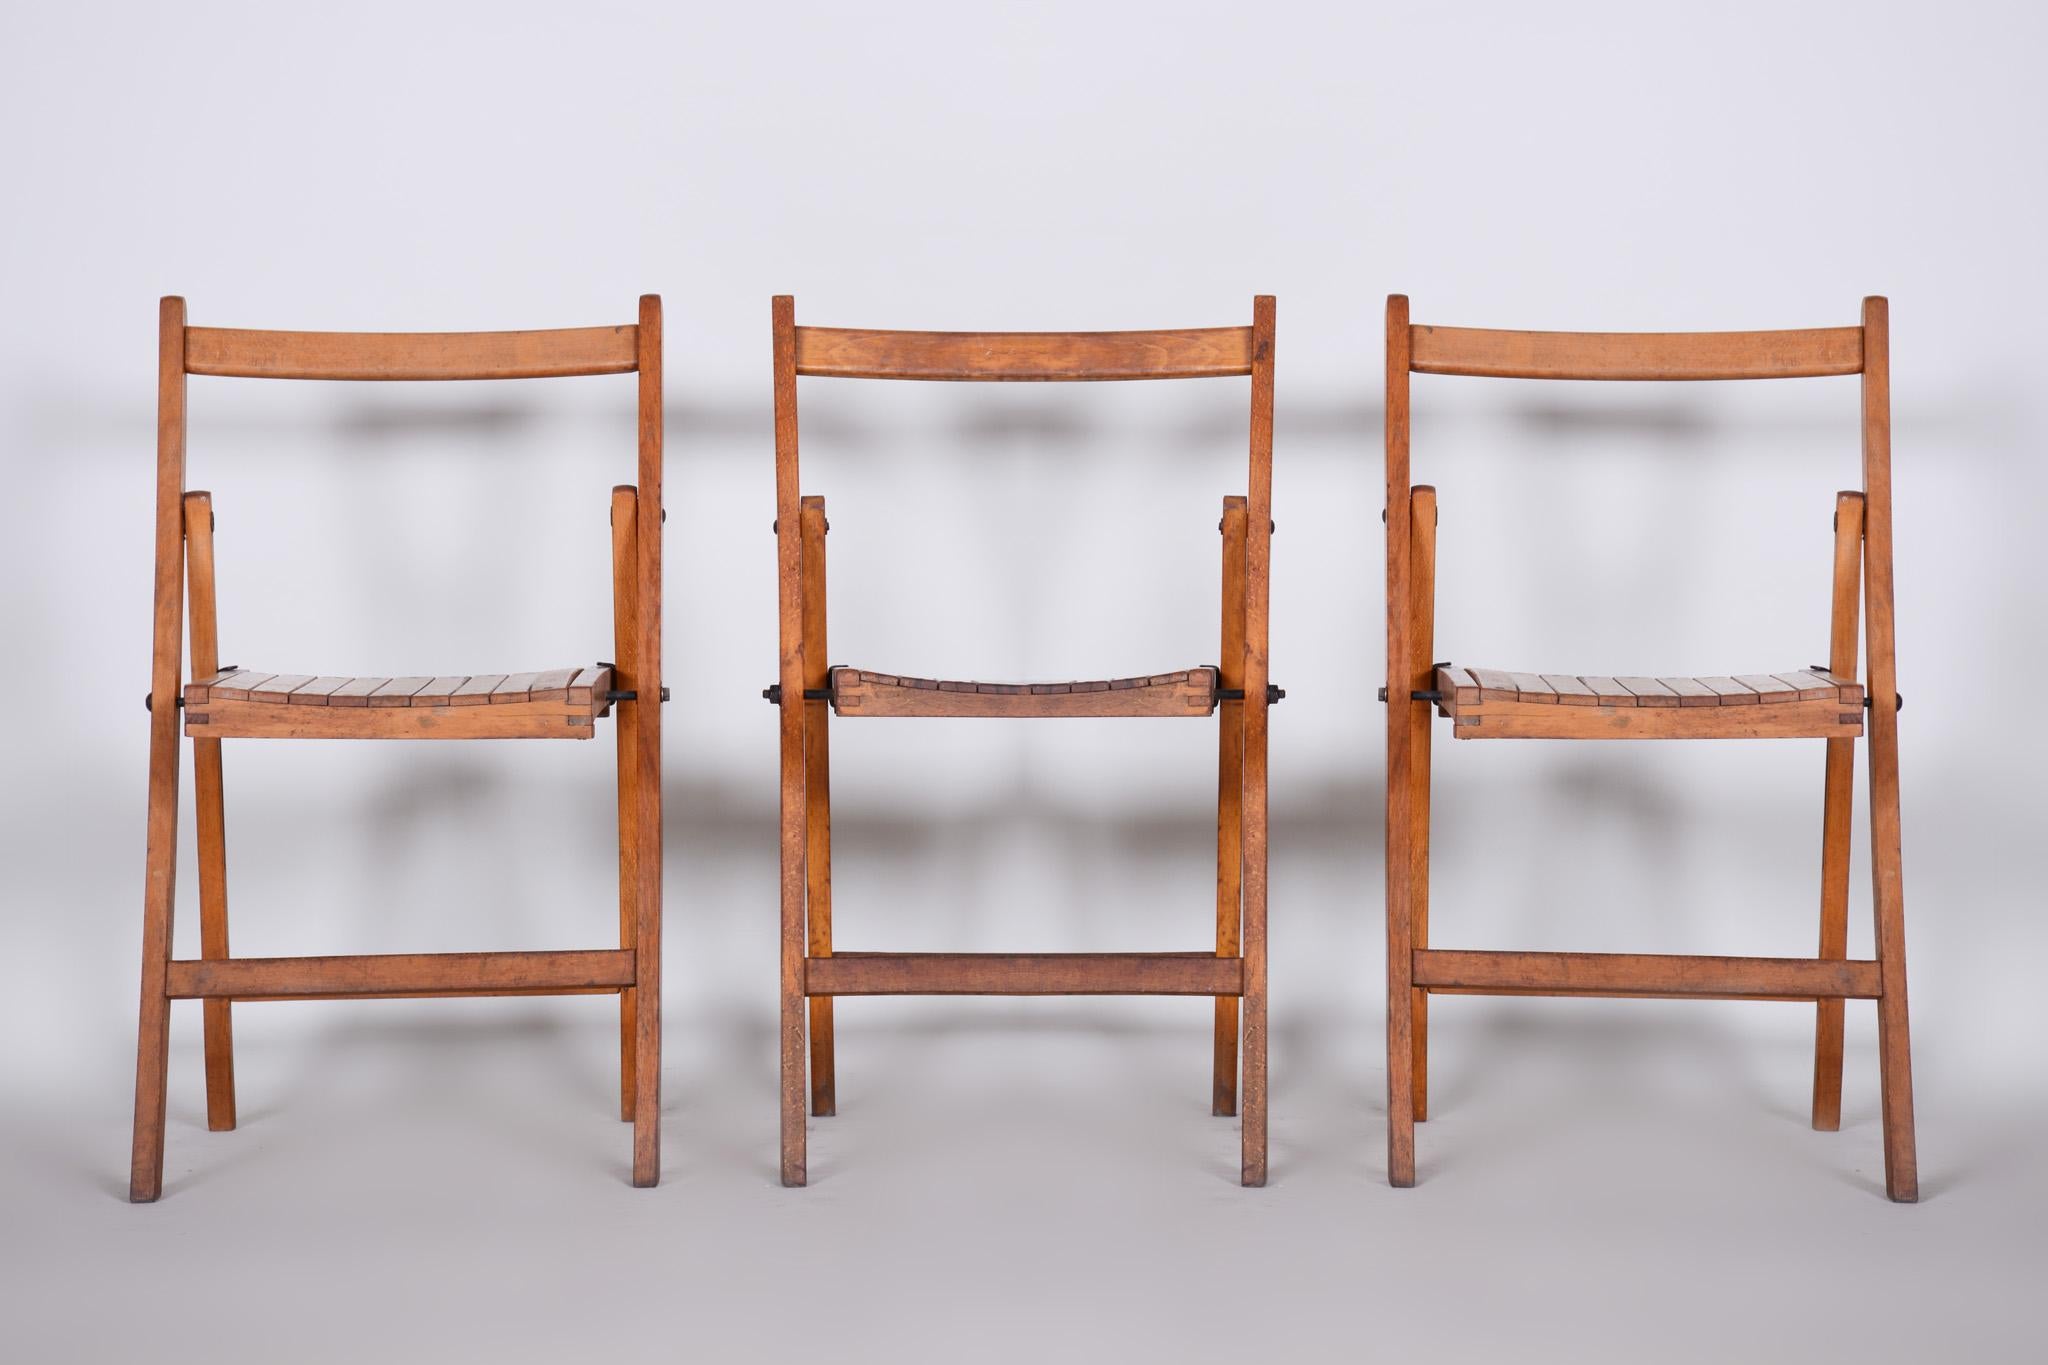 Czech Midcentury Beech Chairs, Original Condition, 1950s, 3 Pieces For Sale 6